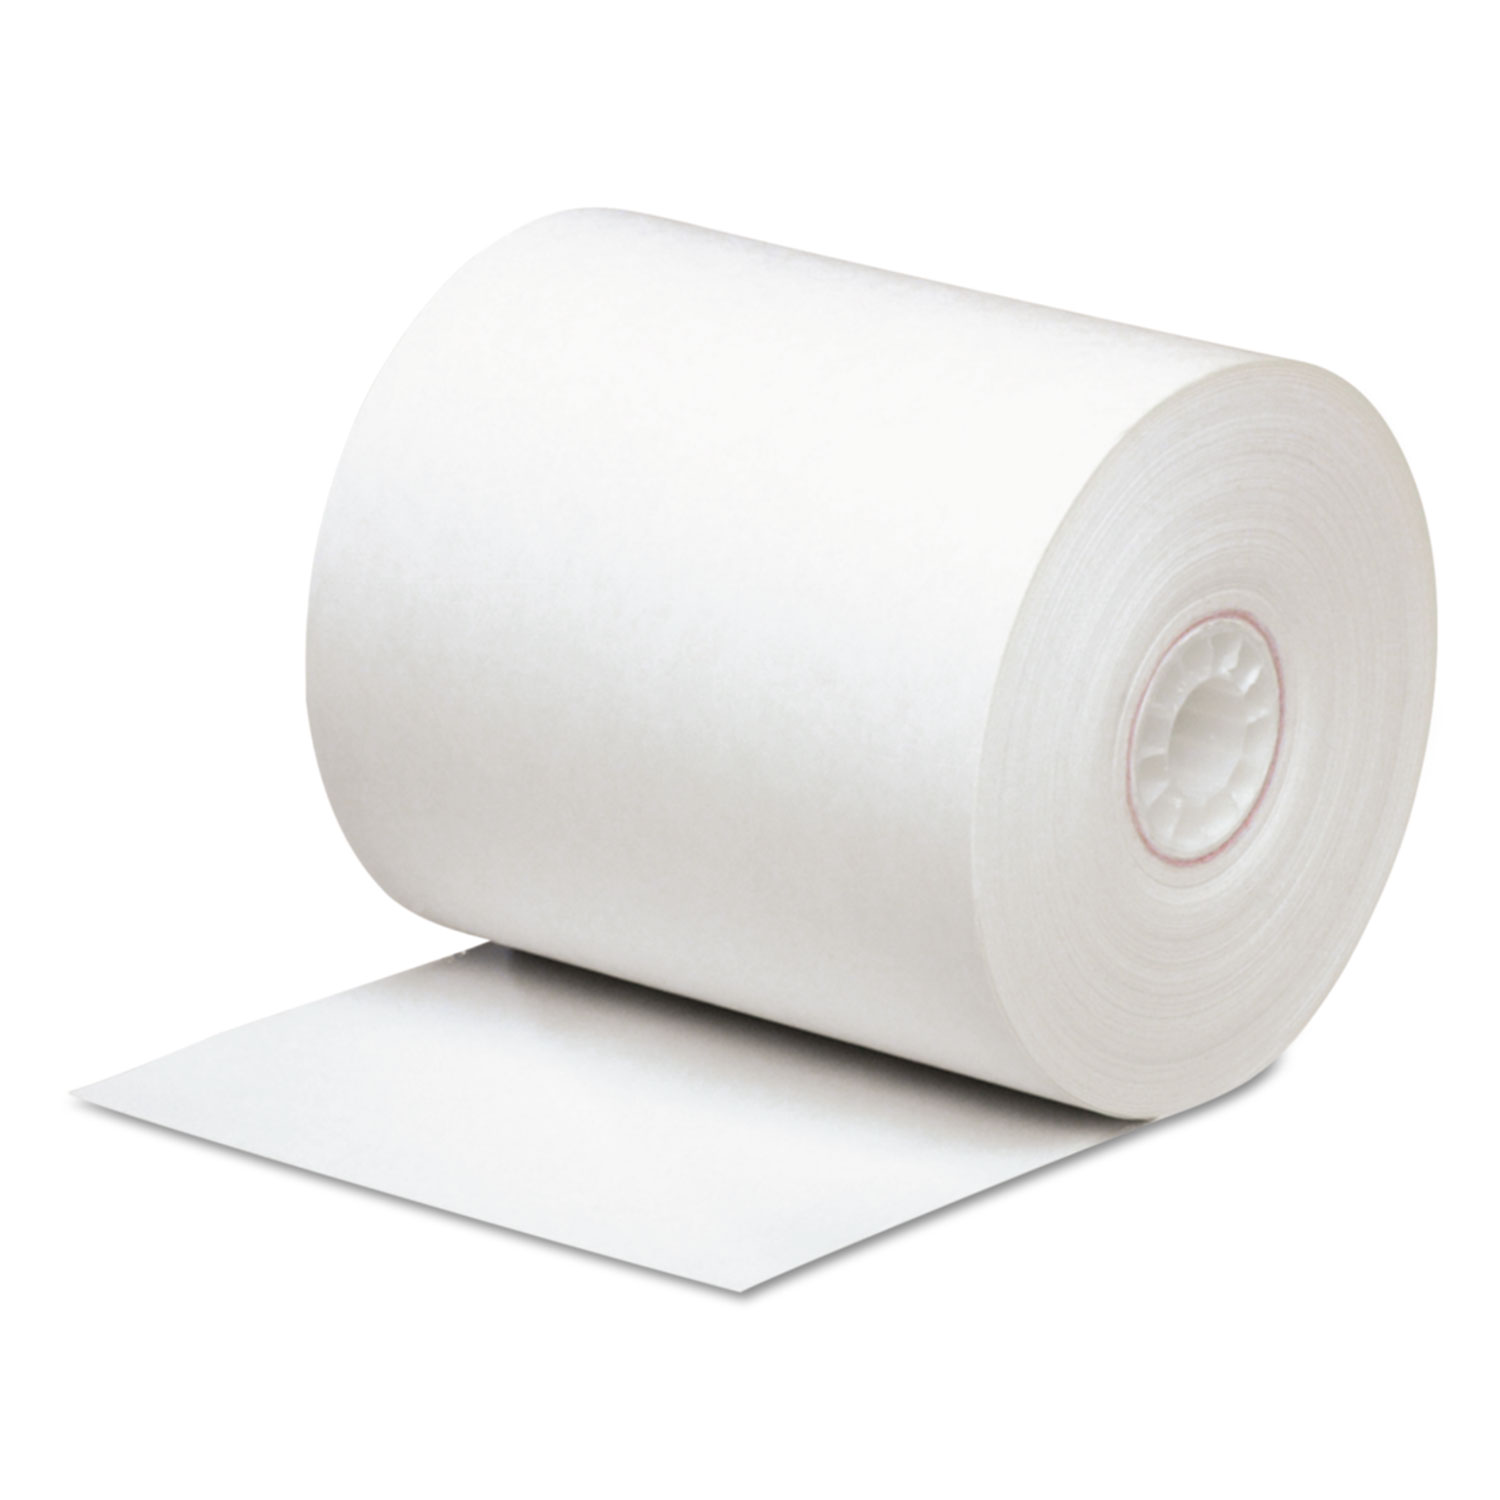  Iconex 05290 Direct Thermal Printing Paper Rolls, 0.45 Core, 3.13 x 290 ft, White, 50/Carton (ICX90780569) 